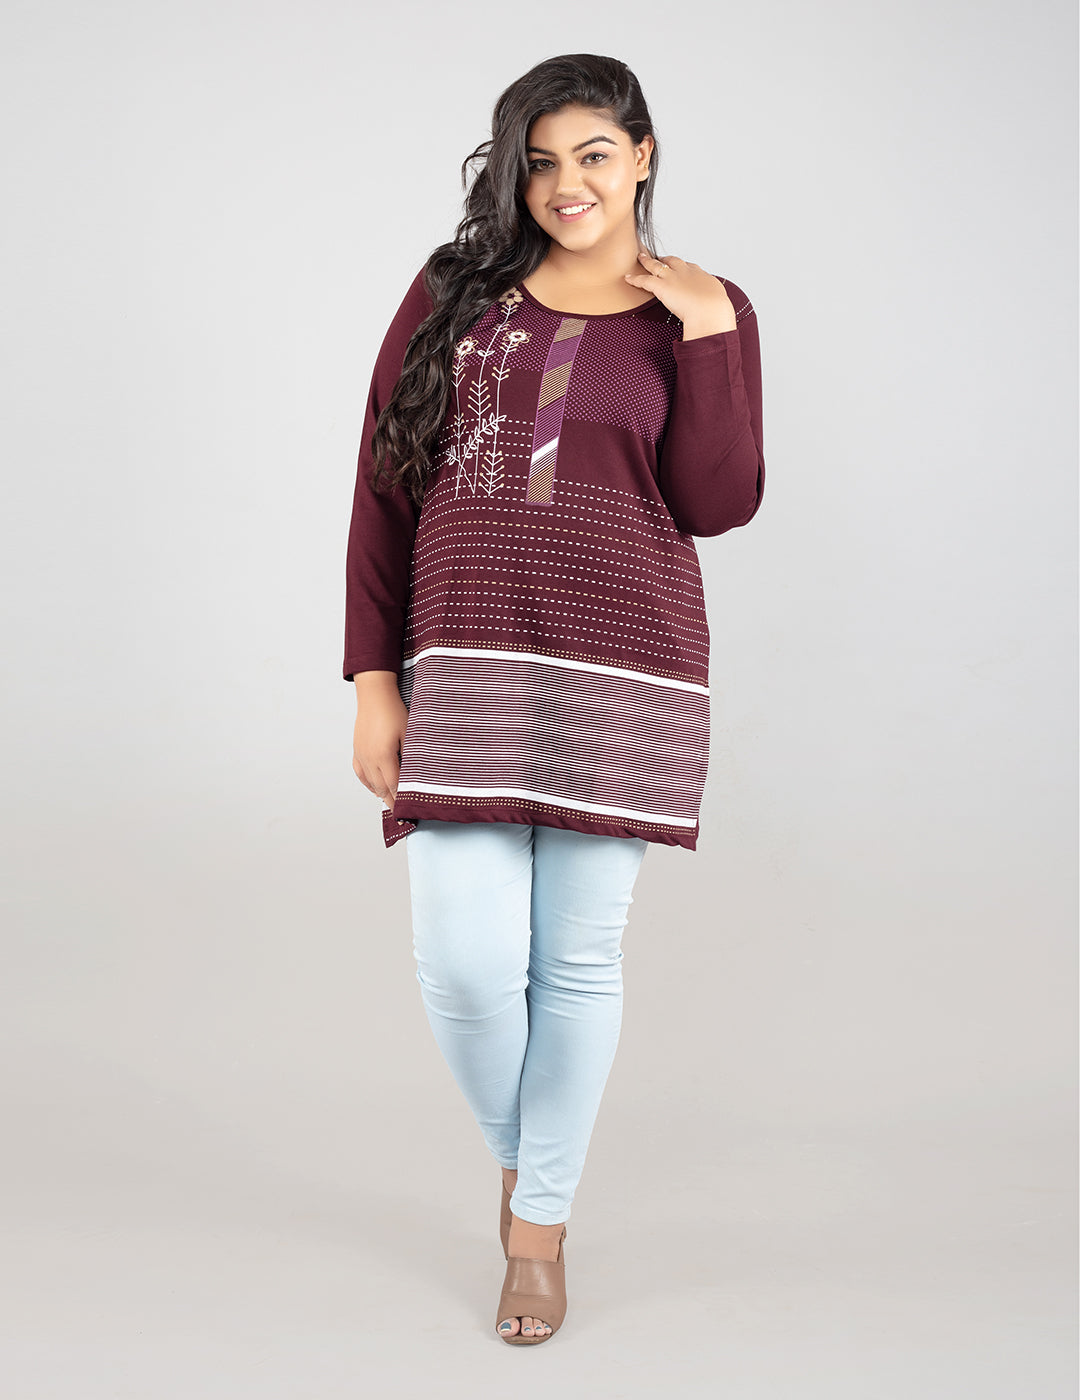 Plus Size Printed Long Tops For Women Full Sleeves - Pack of 2 (Wine & Grey) At Onlion